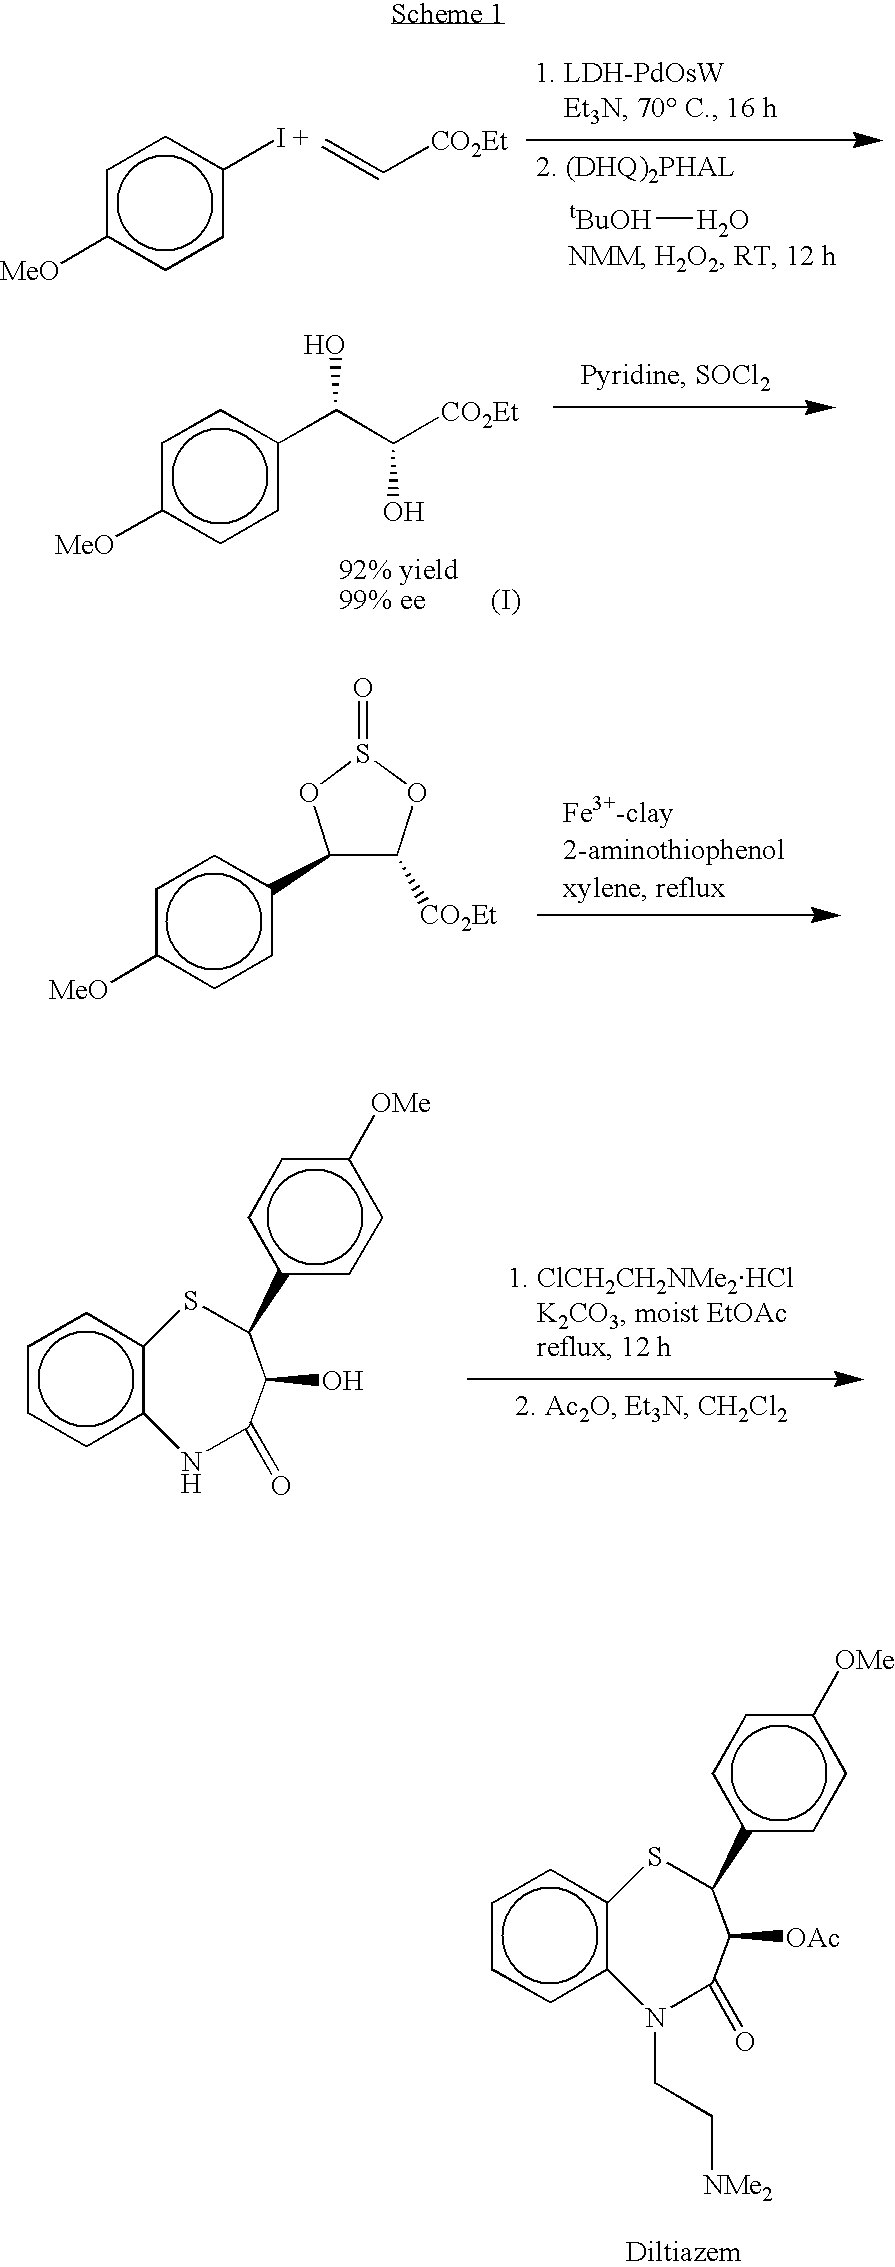 Process for preparing diltiazem using a heterogeneous trifunctional catalyst